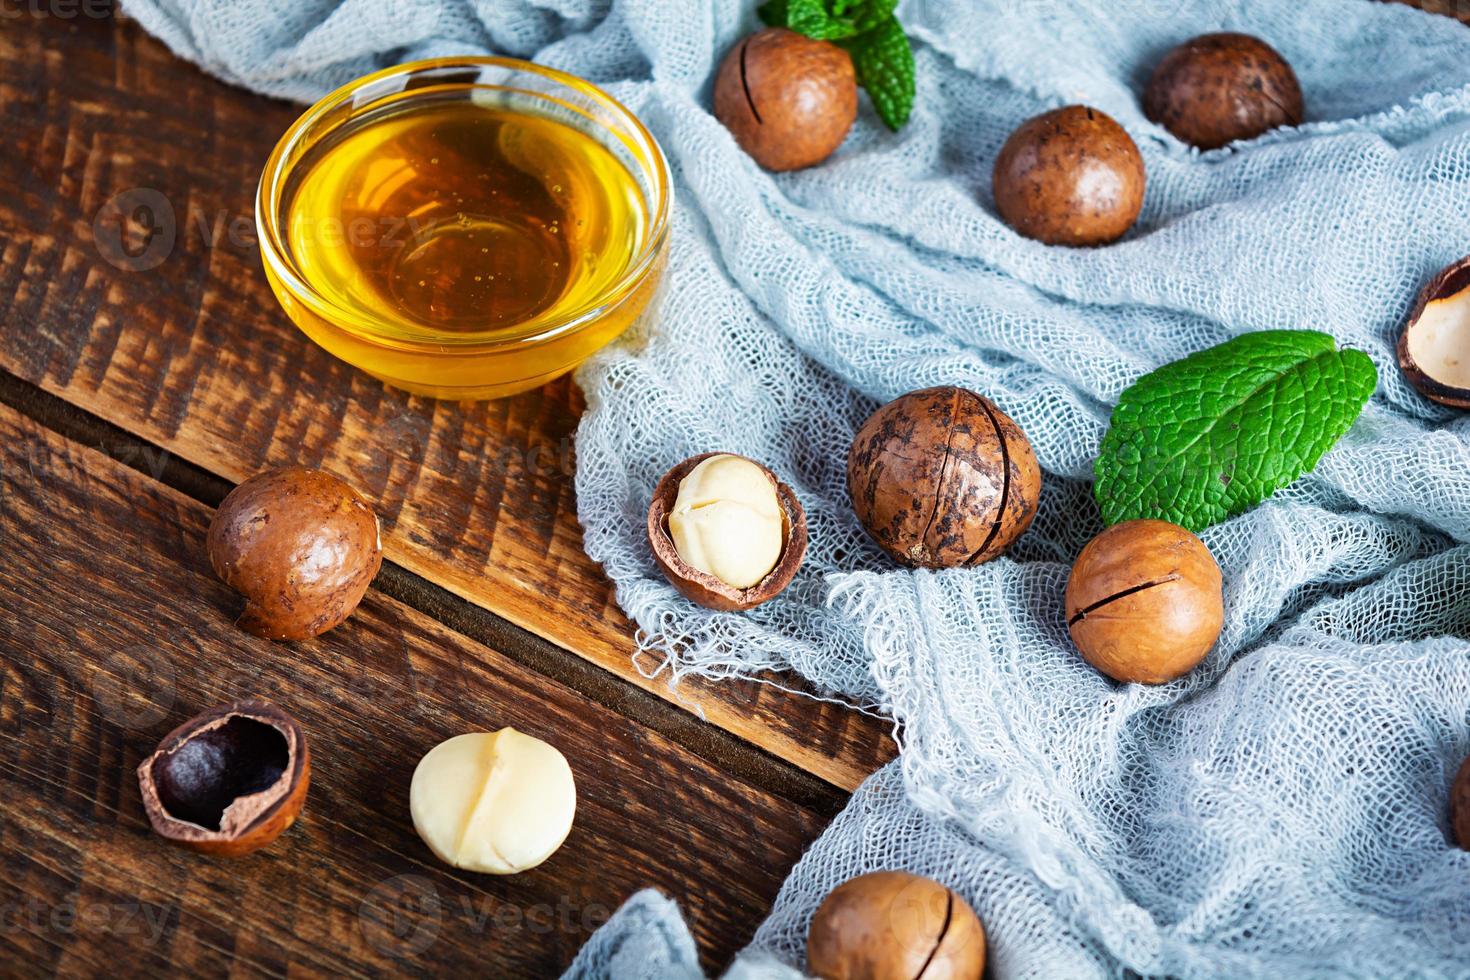 Macadamia nuts in shell with mint leaves and honey on wooden background photo